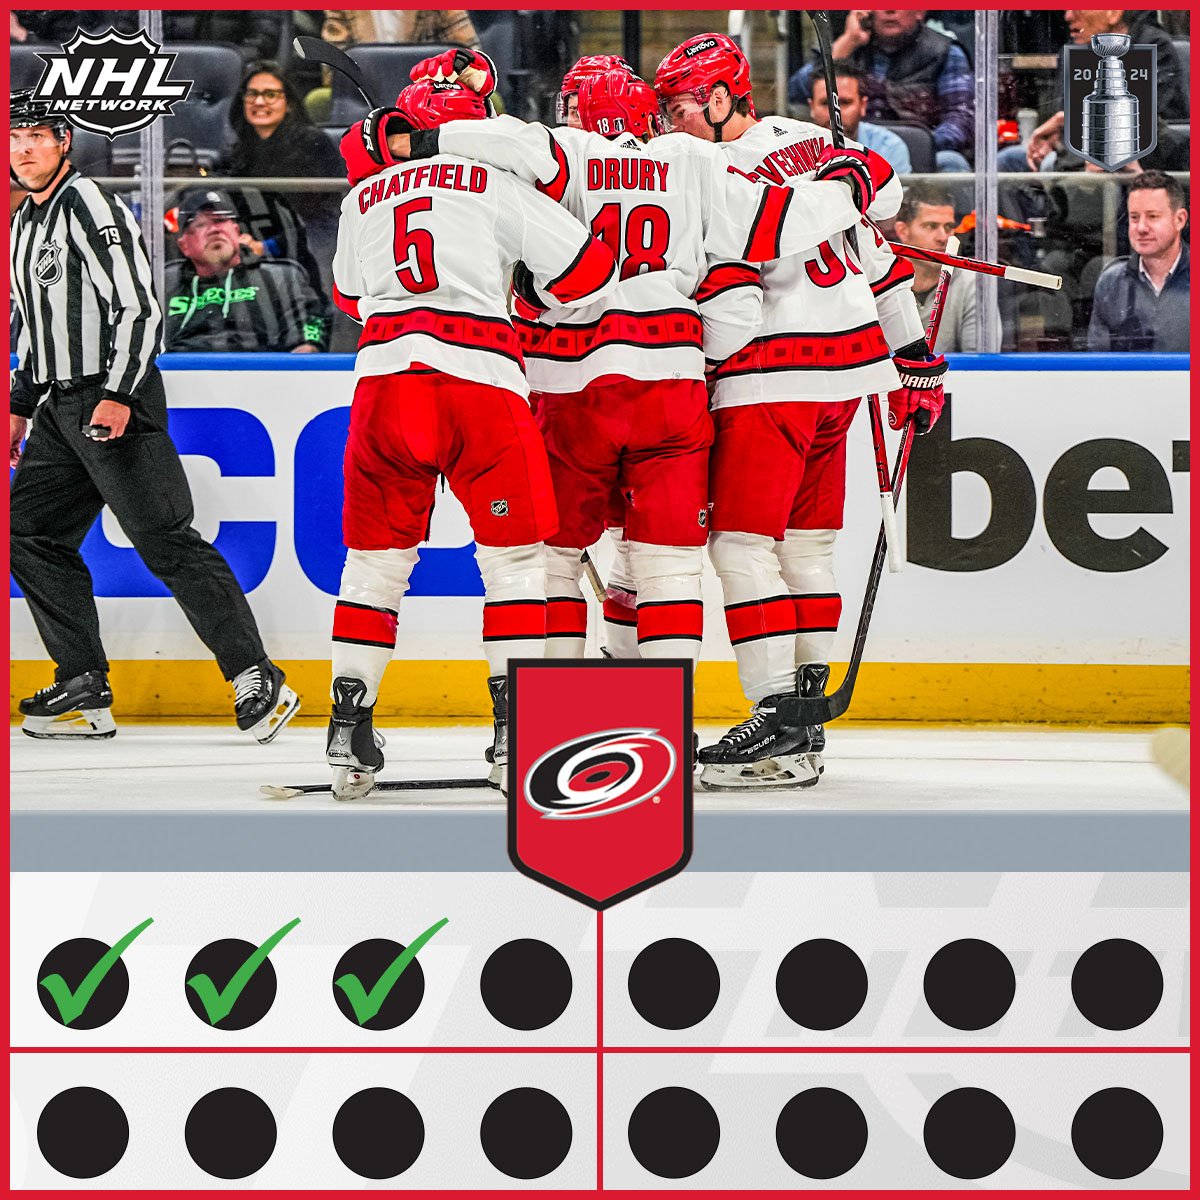 The storm surge continues! The @Canes take Game 3! #CauseChaos | #StanleyCup